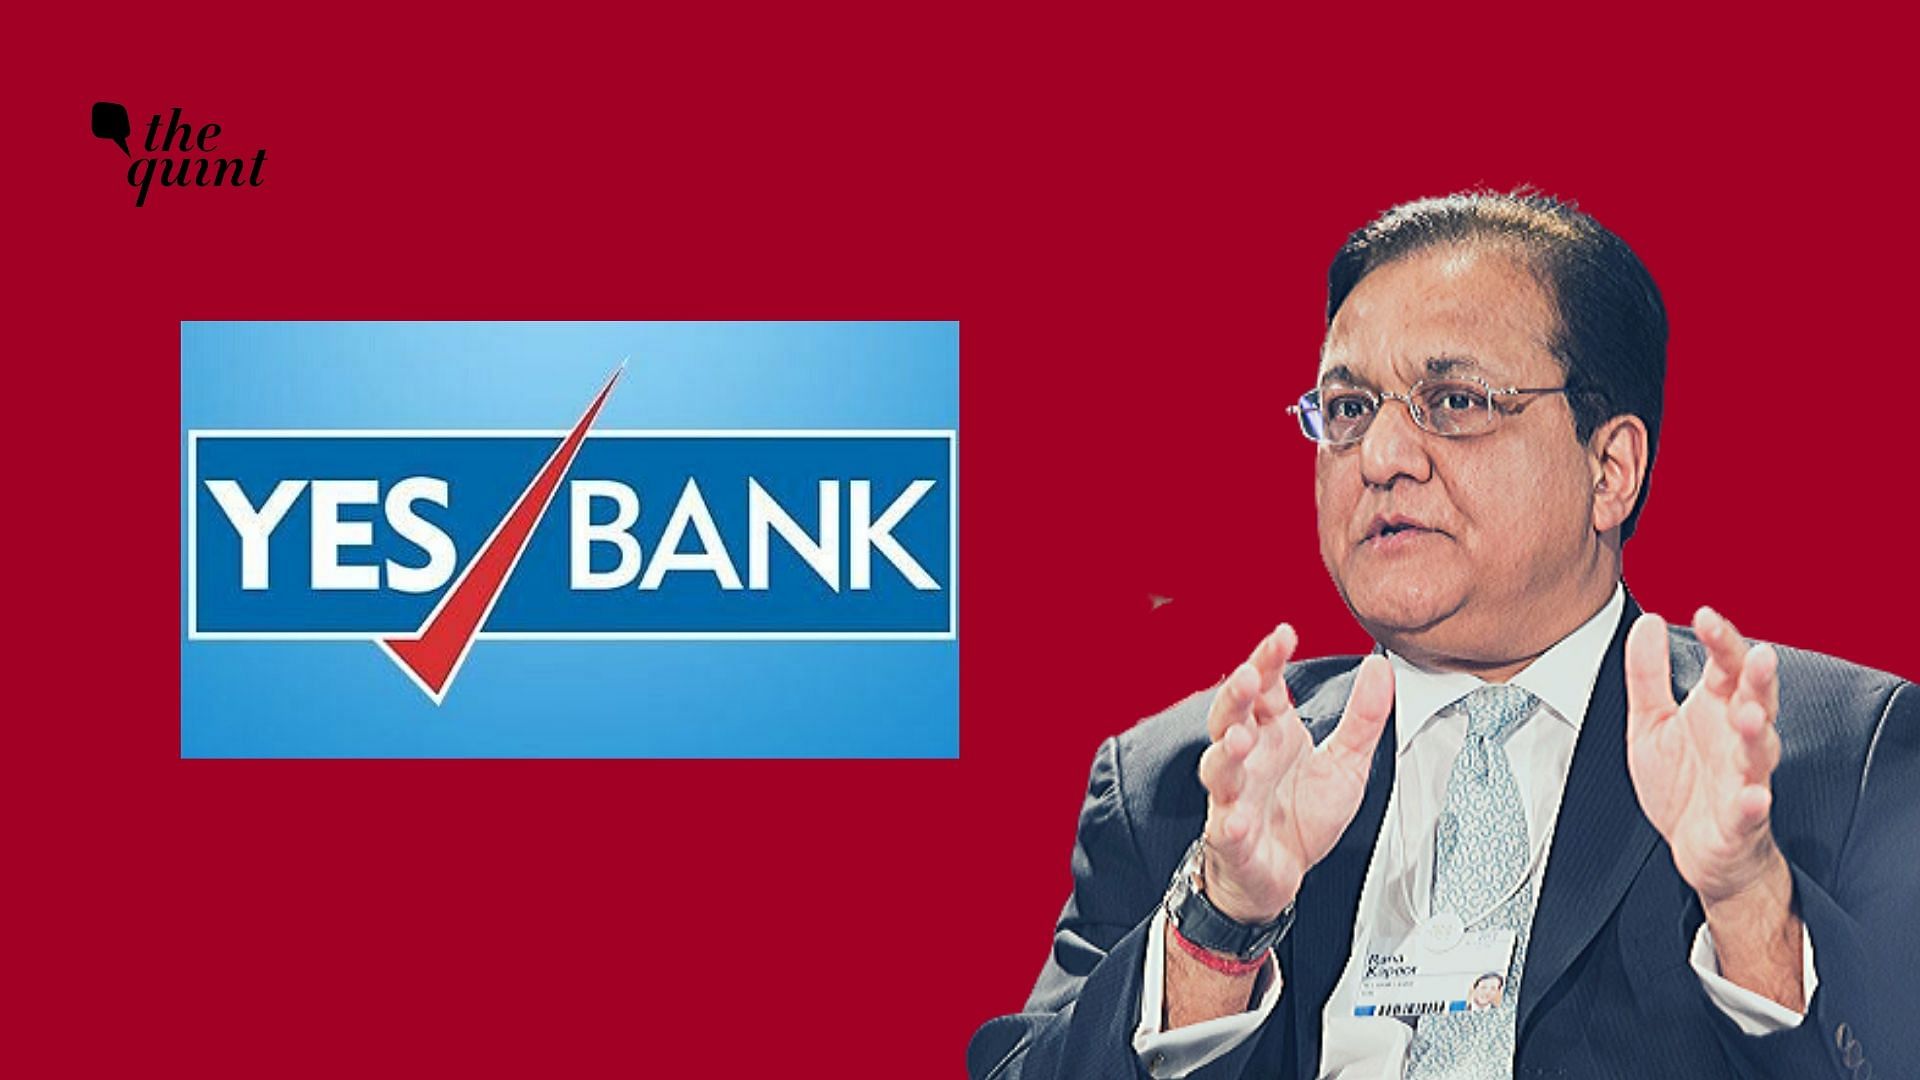 The Enforcement Directorate on Friday, 6 March, raided the Mumbai residence of Yes Bank founder Rana Kapoor in connection with a money laundering probe against him, officials said.